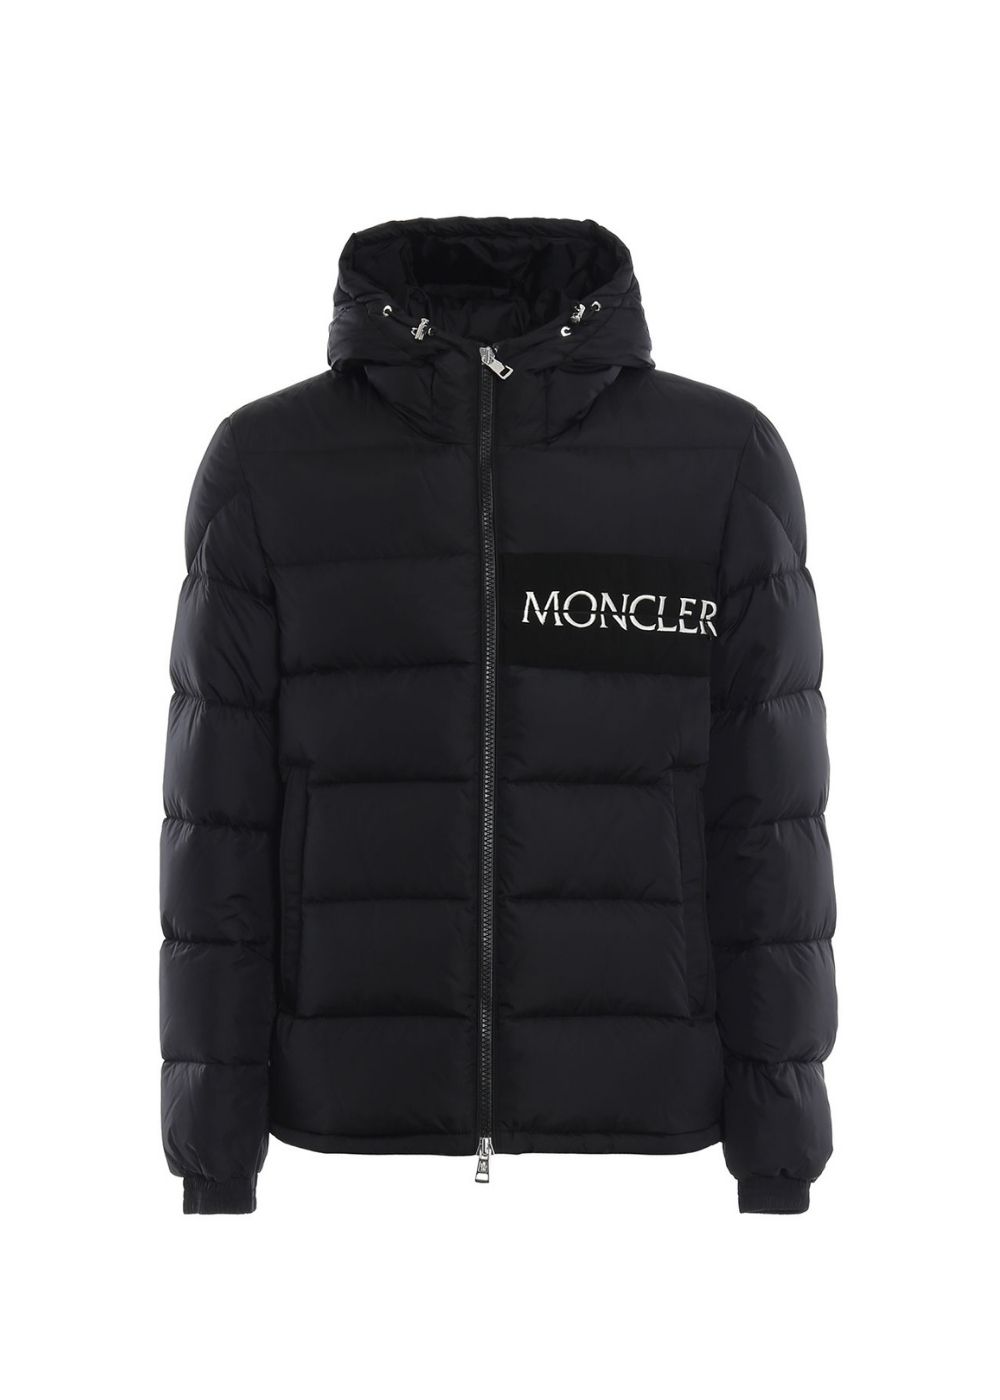 Featured image for “MONCLER AITON”